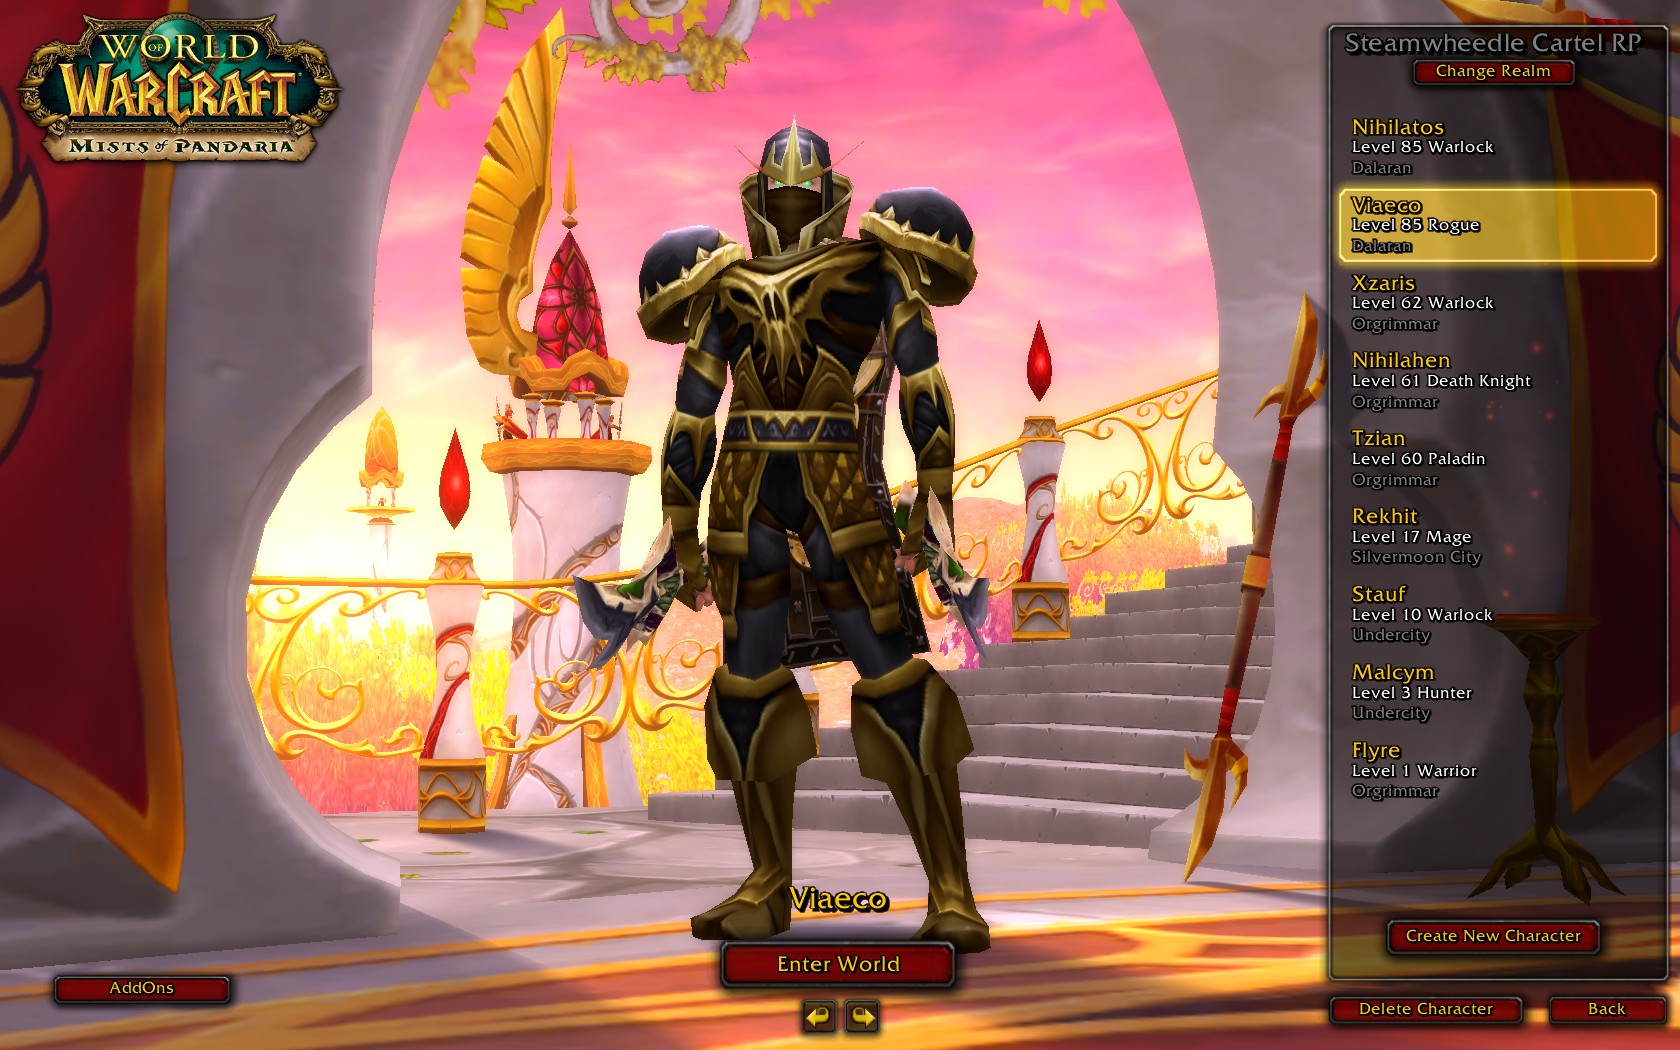 Gallery of Blood Elf Paladin Names.